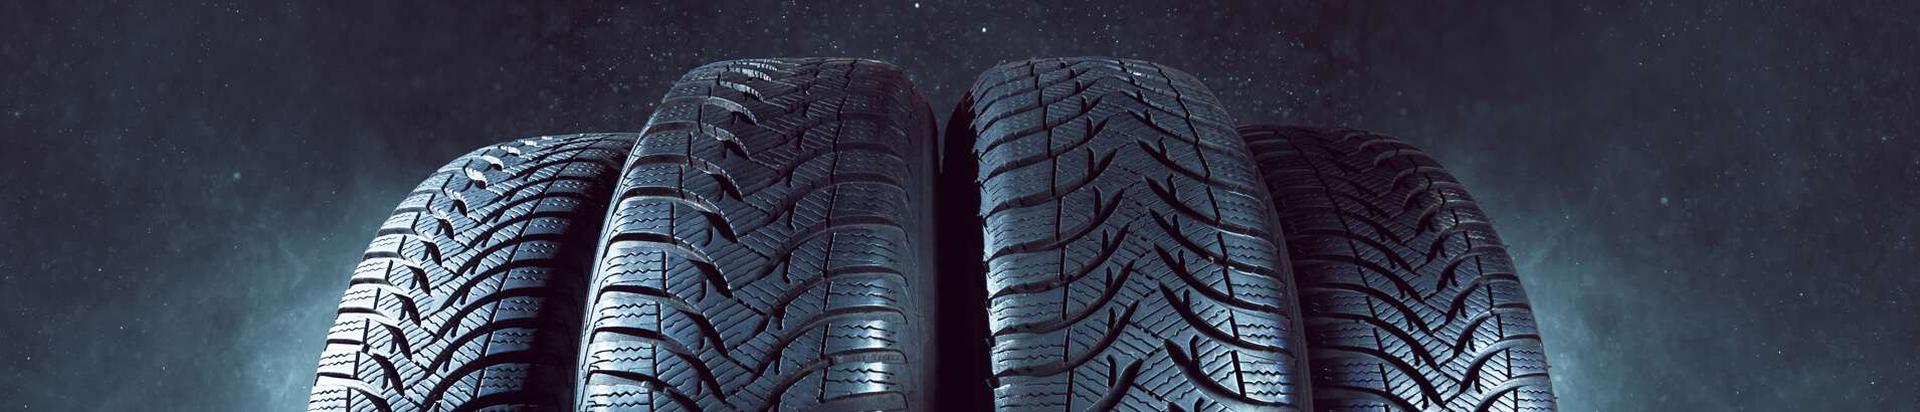 cars and car supplies, Tyres and Tireworks, Maintenance and repair of motor vehicles, passenger car tyres, truck tyres, wholesale of tyres, Wholesale, bus tyres, lift tyres, package tyres